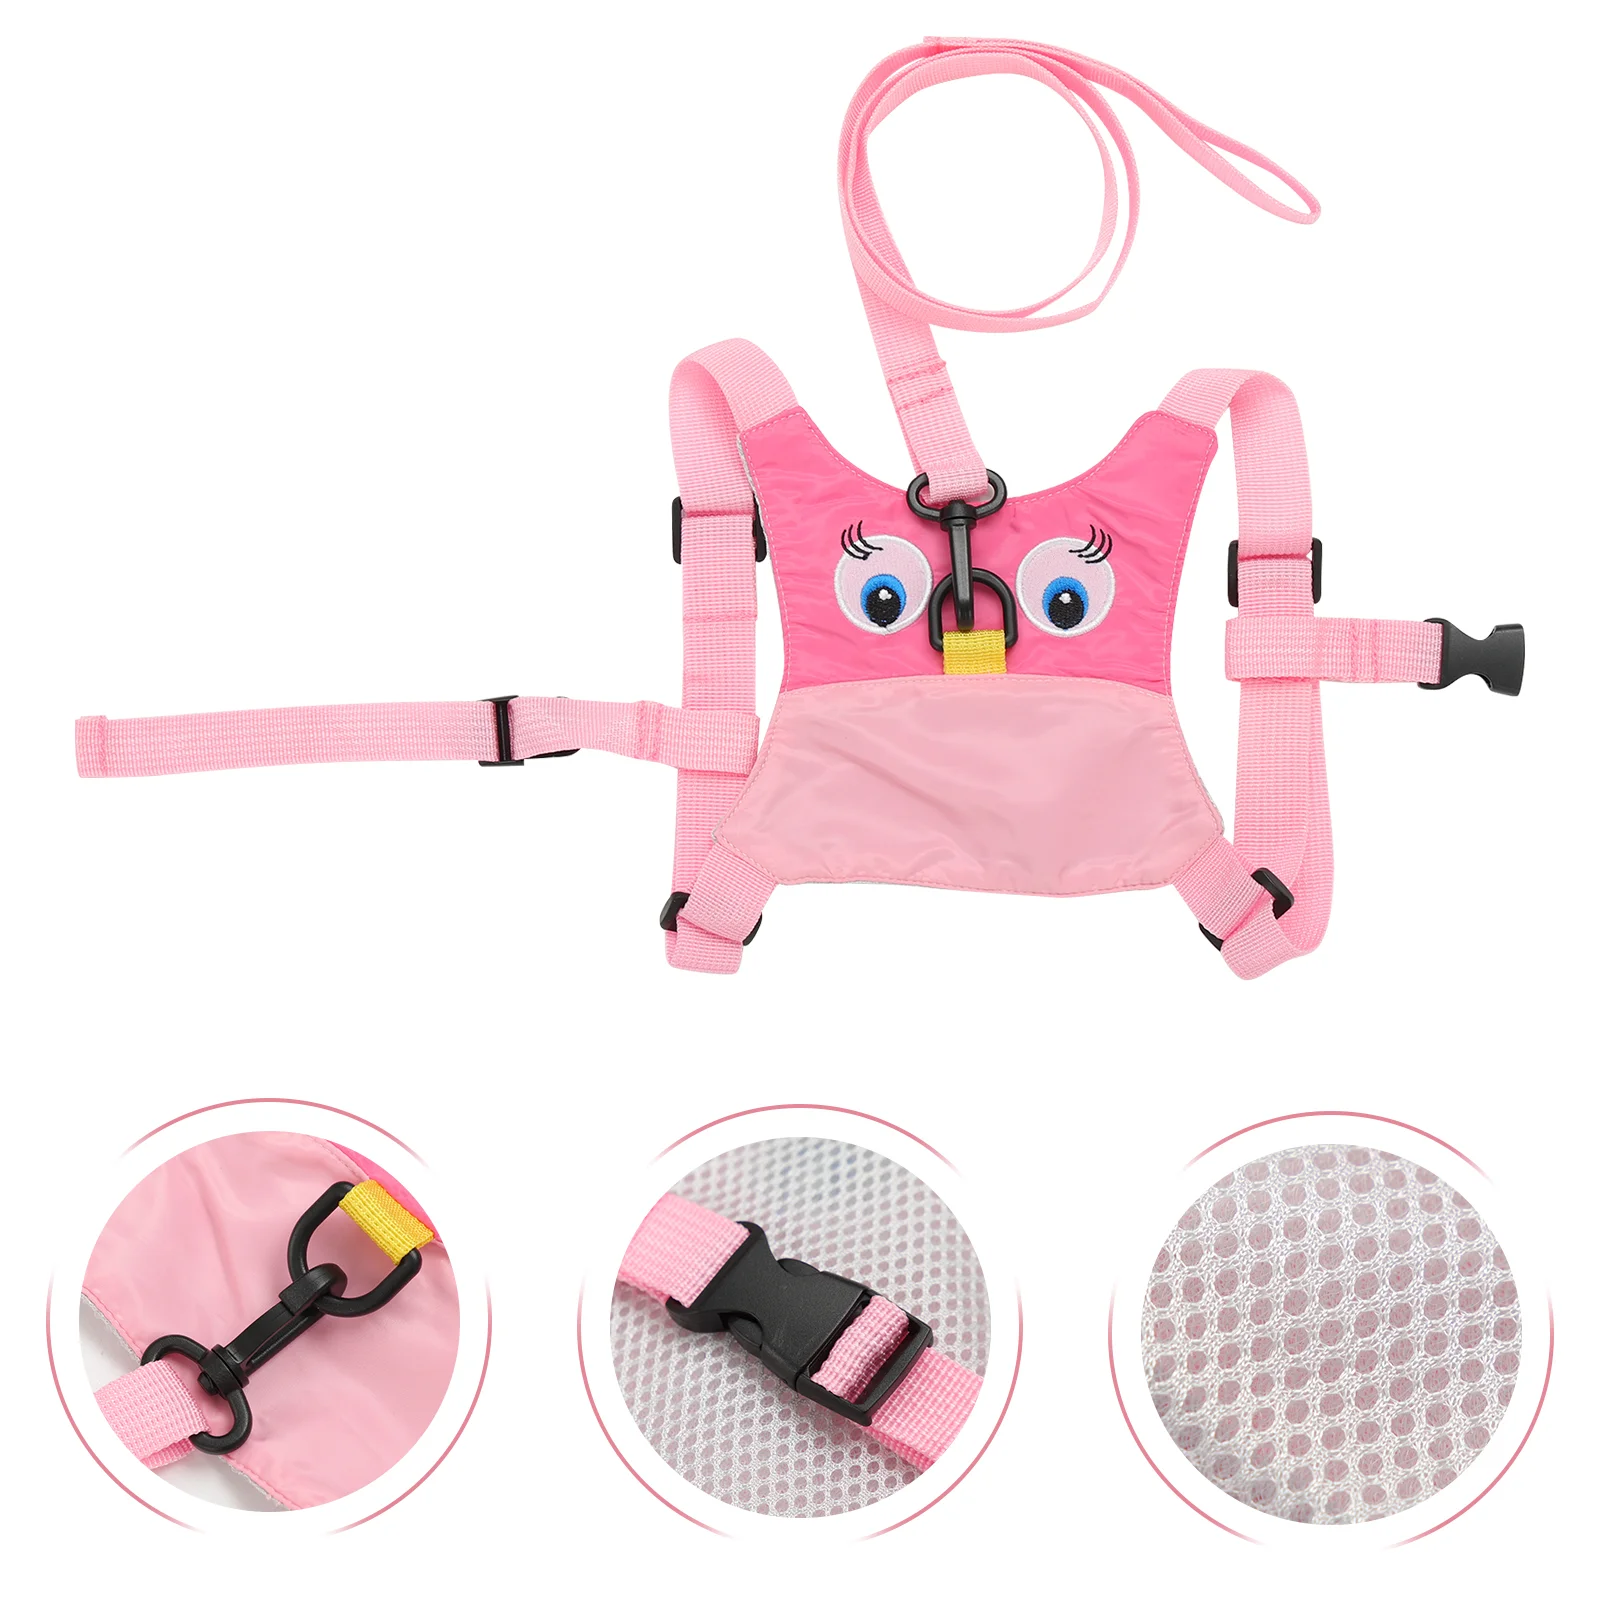 

Baby Leash Toddler Harness Child Safety Kid Kids Carrying Infant Leashes Tether Anti-lost Traction Rope